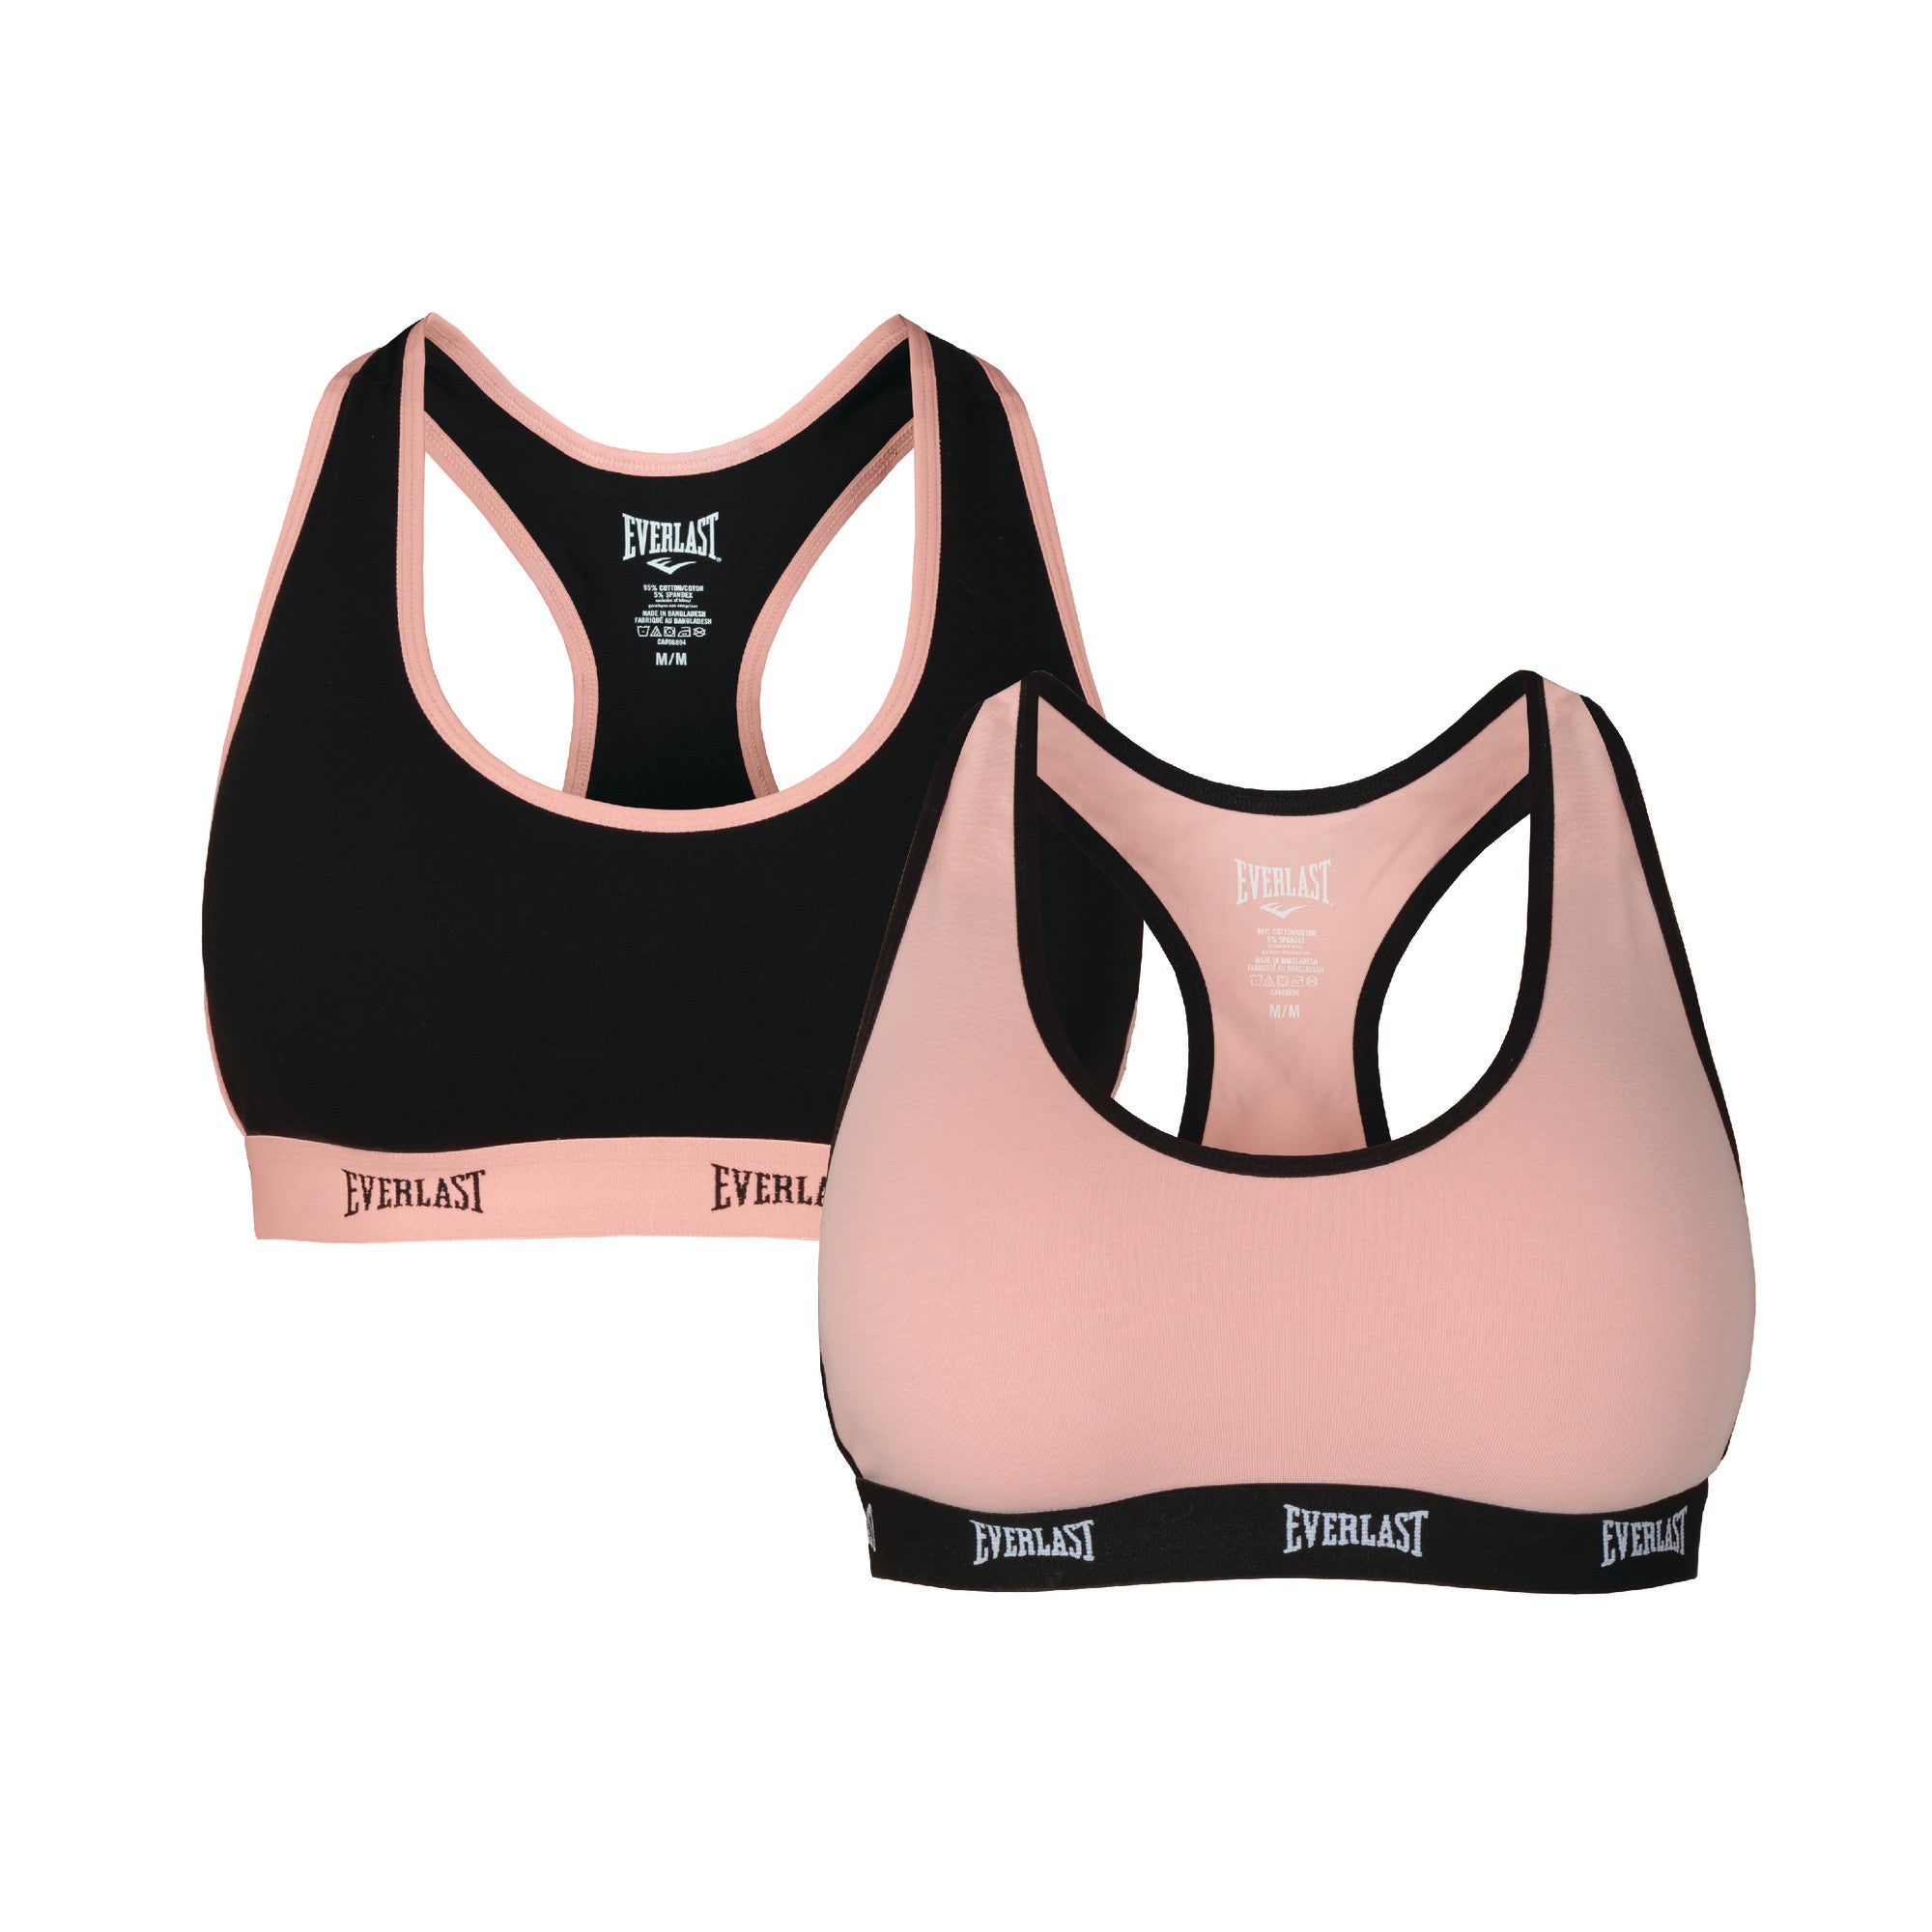 Form Strappy Bra by 2XU Online, THE ICONIC